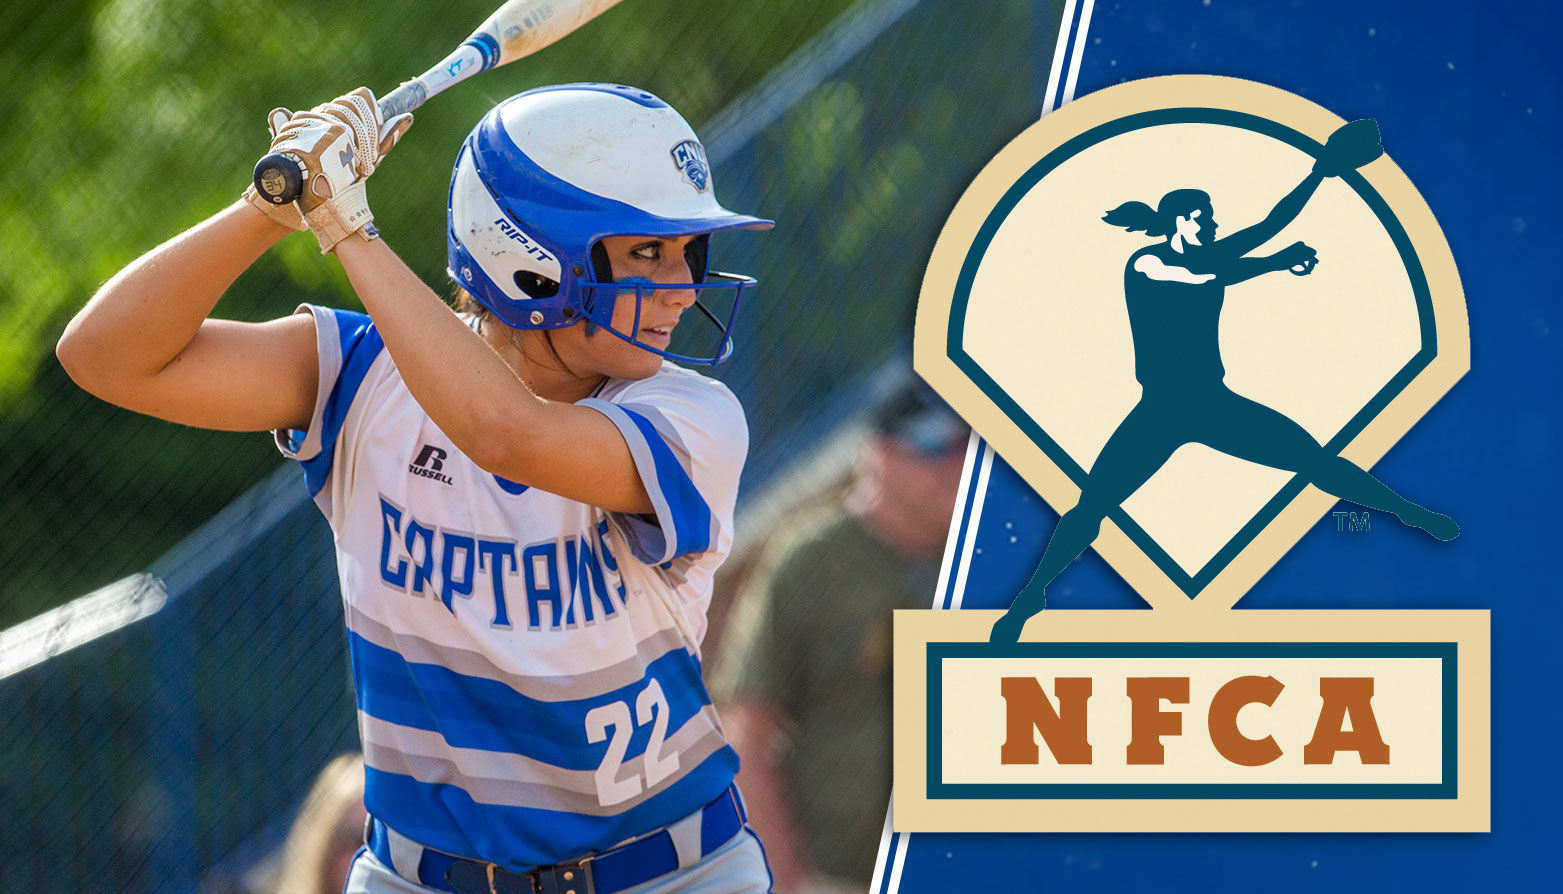 CNU's Patty Maye Ohanian Named One of Ten Finalists for Schutt Sports National Player of the Year Honor